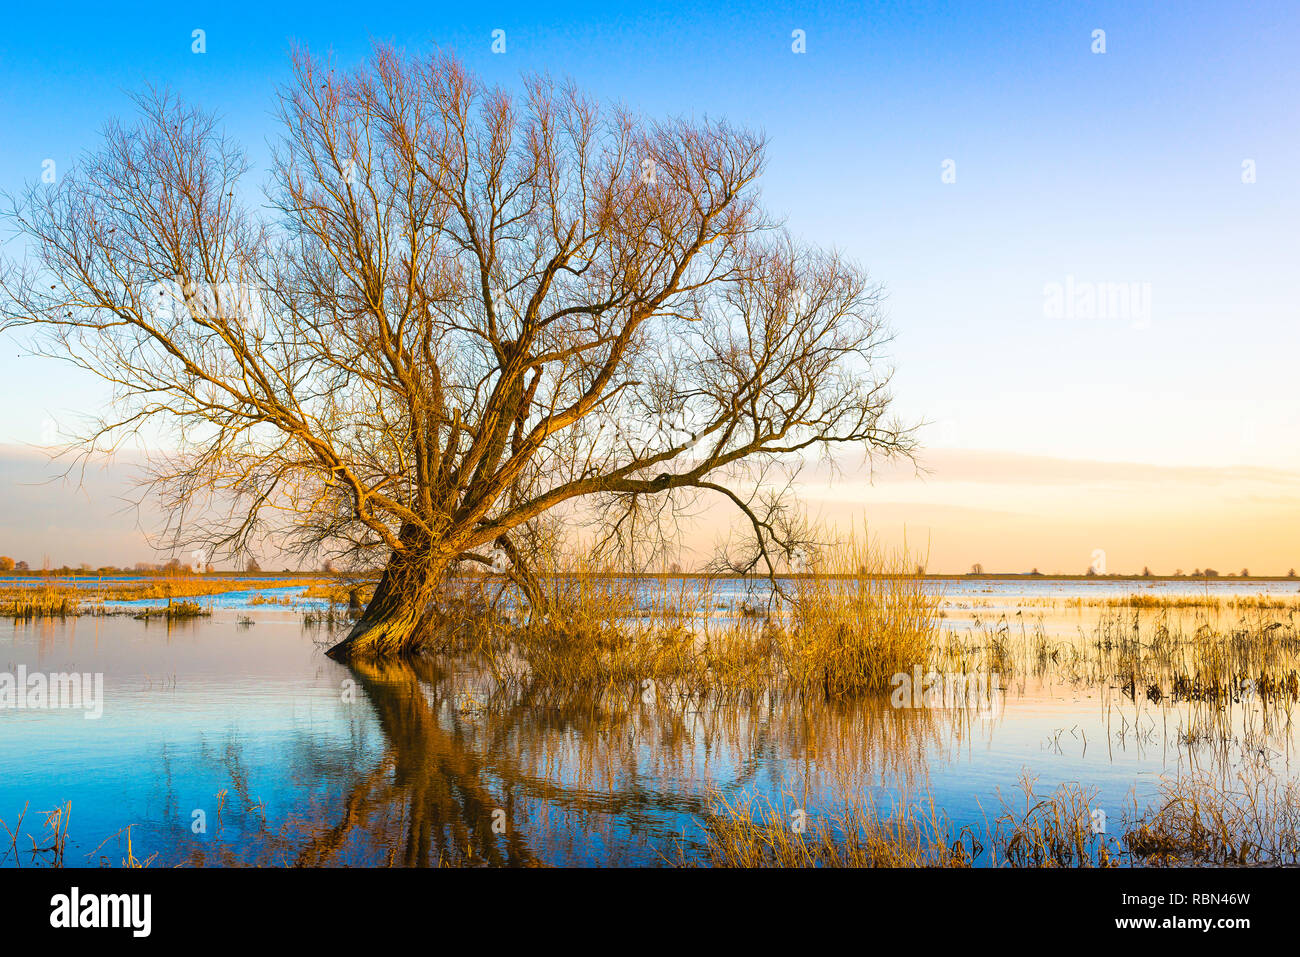 Fens UK, winter view of a partially submerged tree in a flooded Fodder Fen in Cambridgeshire, England, UK. Stock Photo